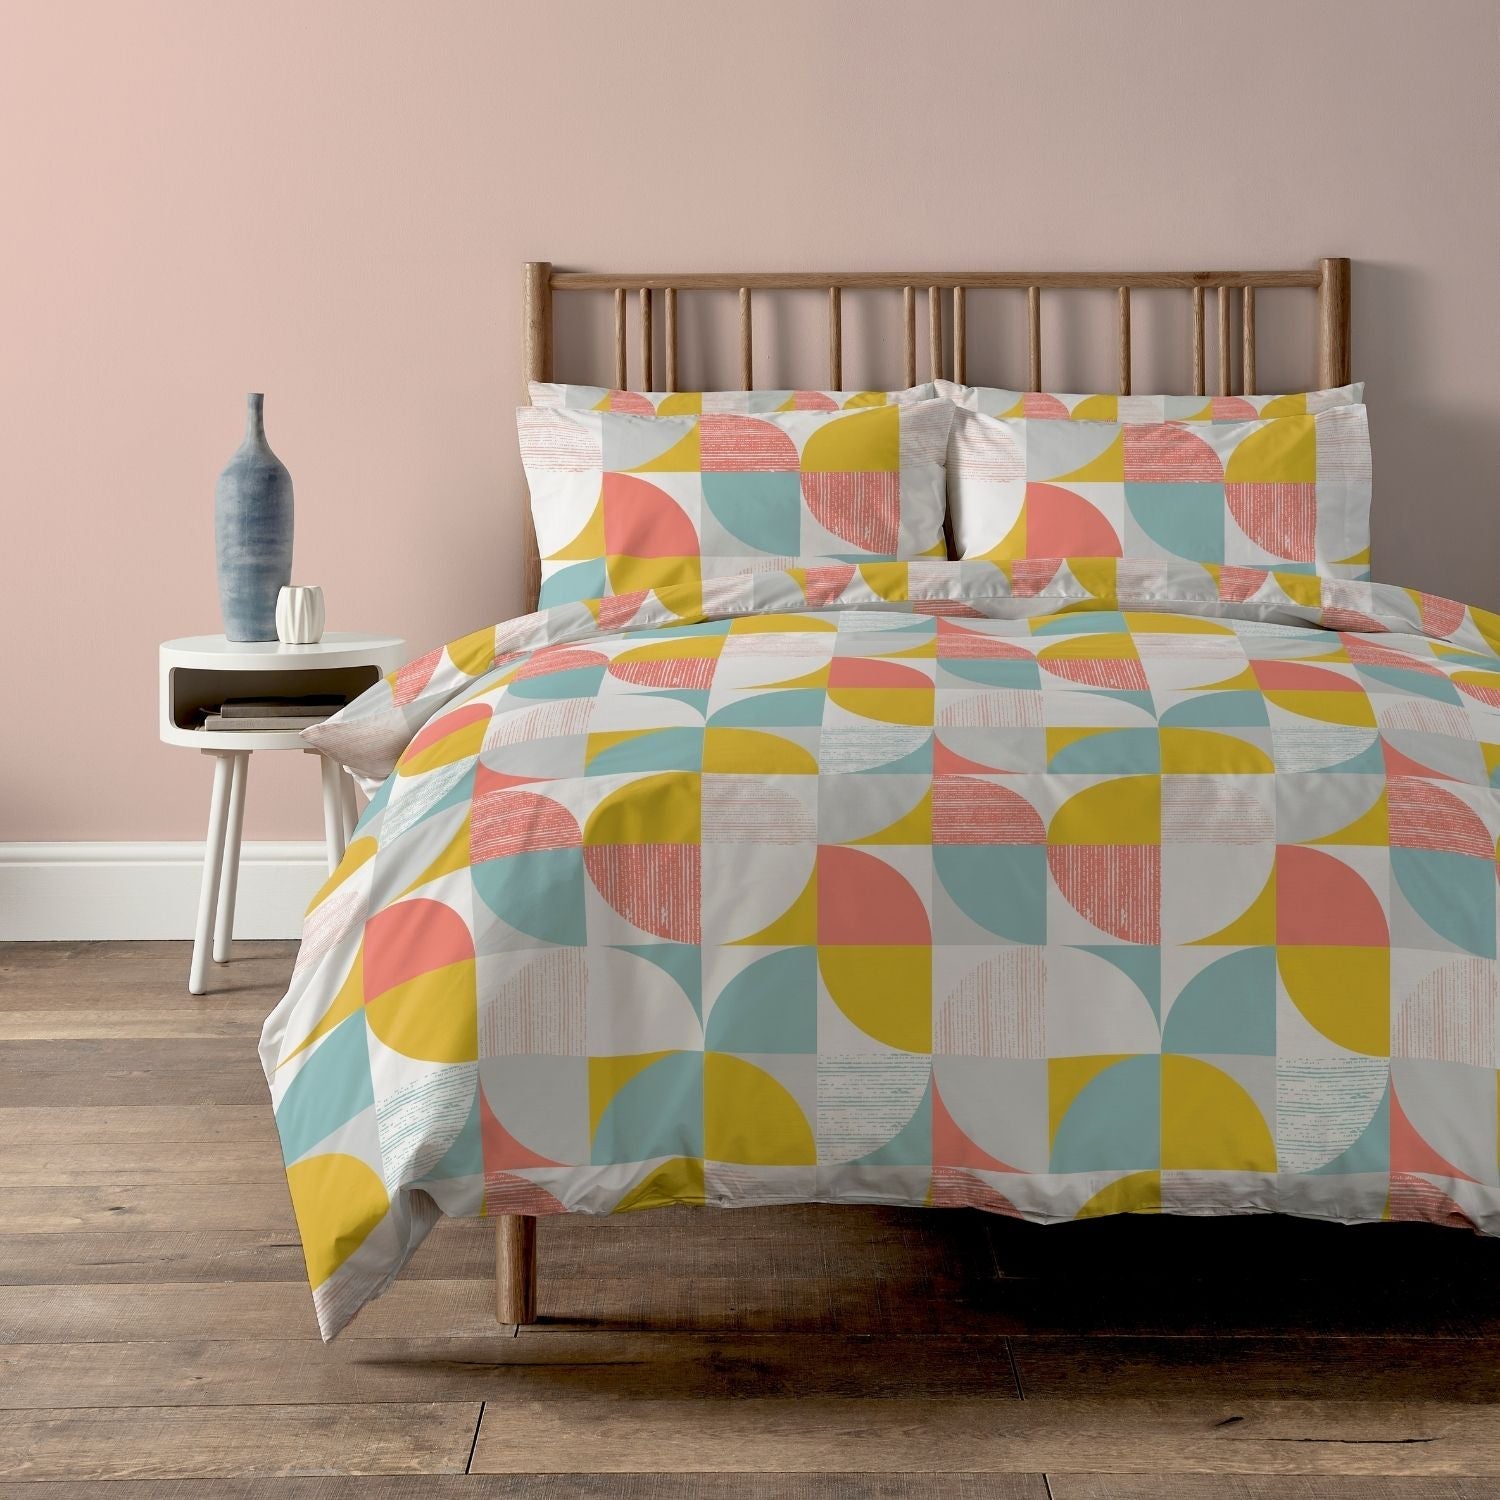  The Home Bedroom Nordic Geo Duvet Cover Set - Double Size 1 Shaws Department Stores